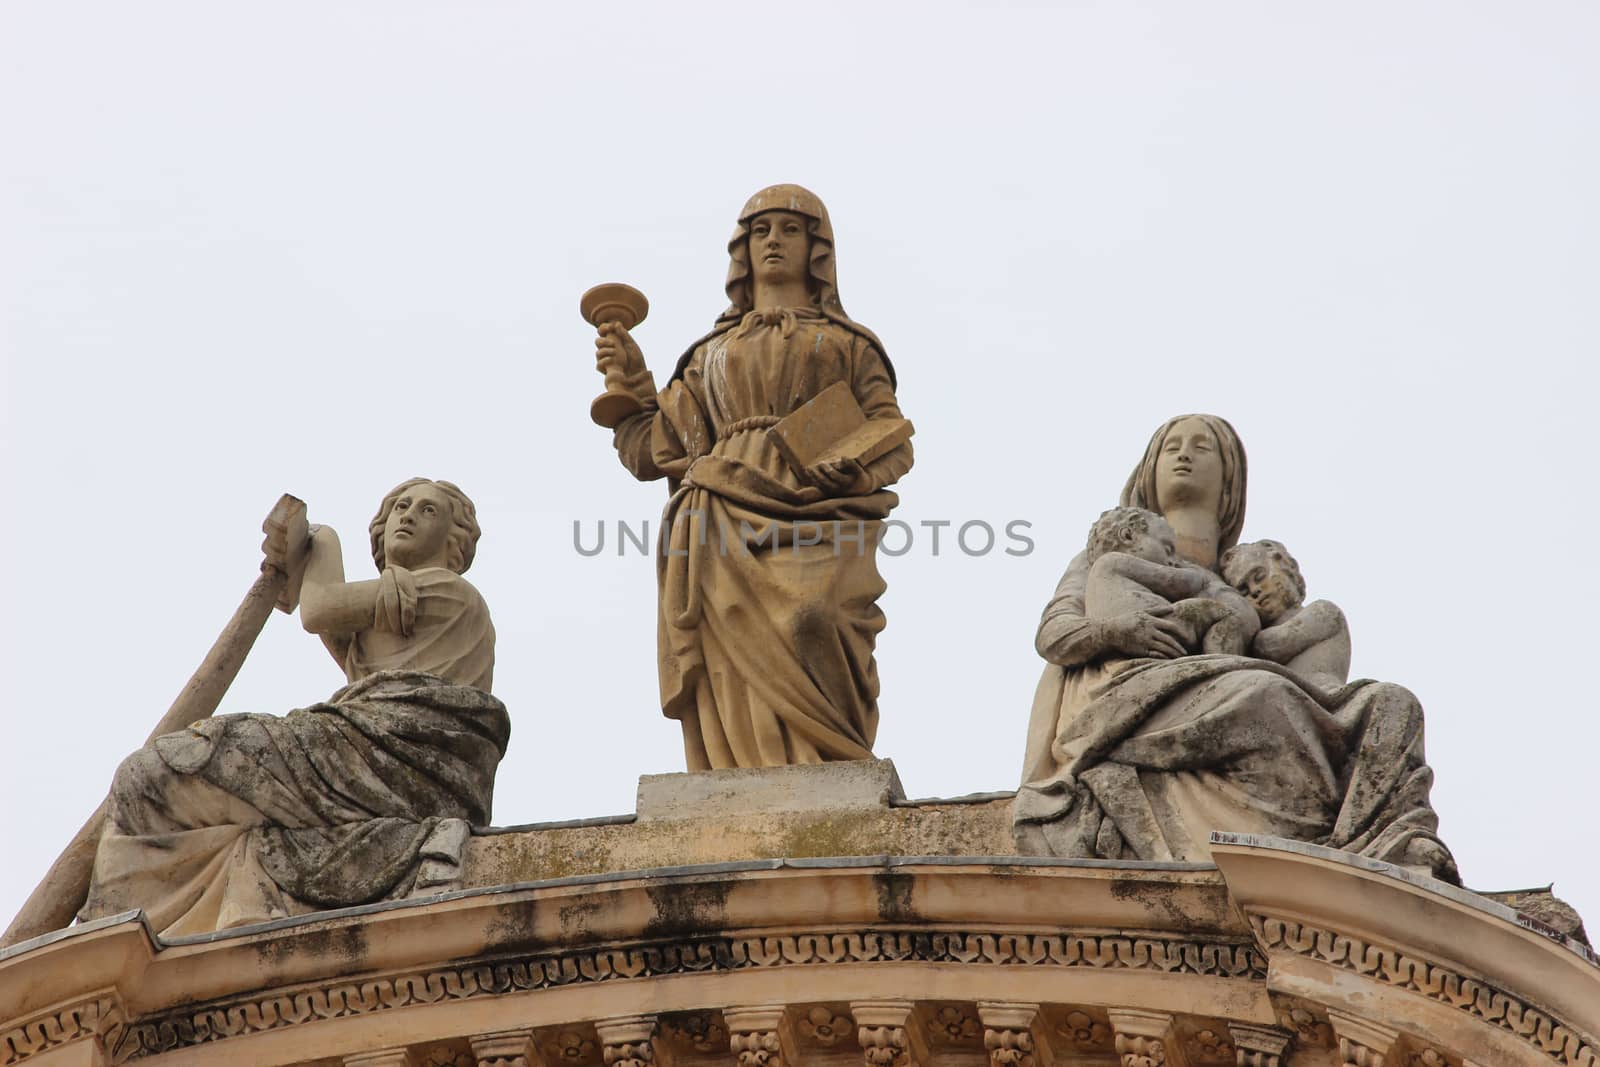 Catholic Sculptures on the Facade of a Church in Menton, France by bensib